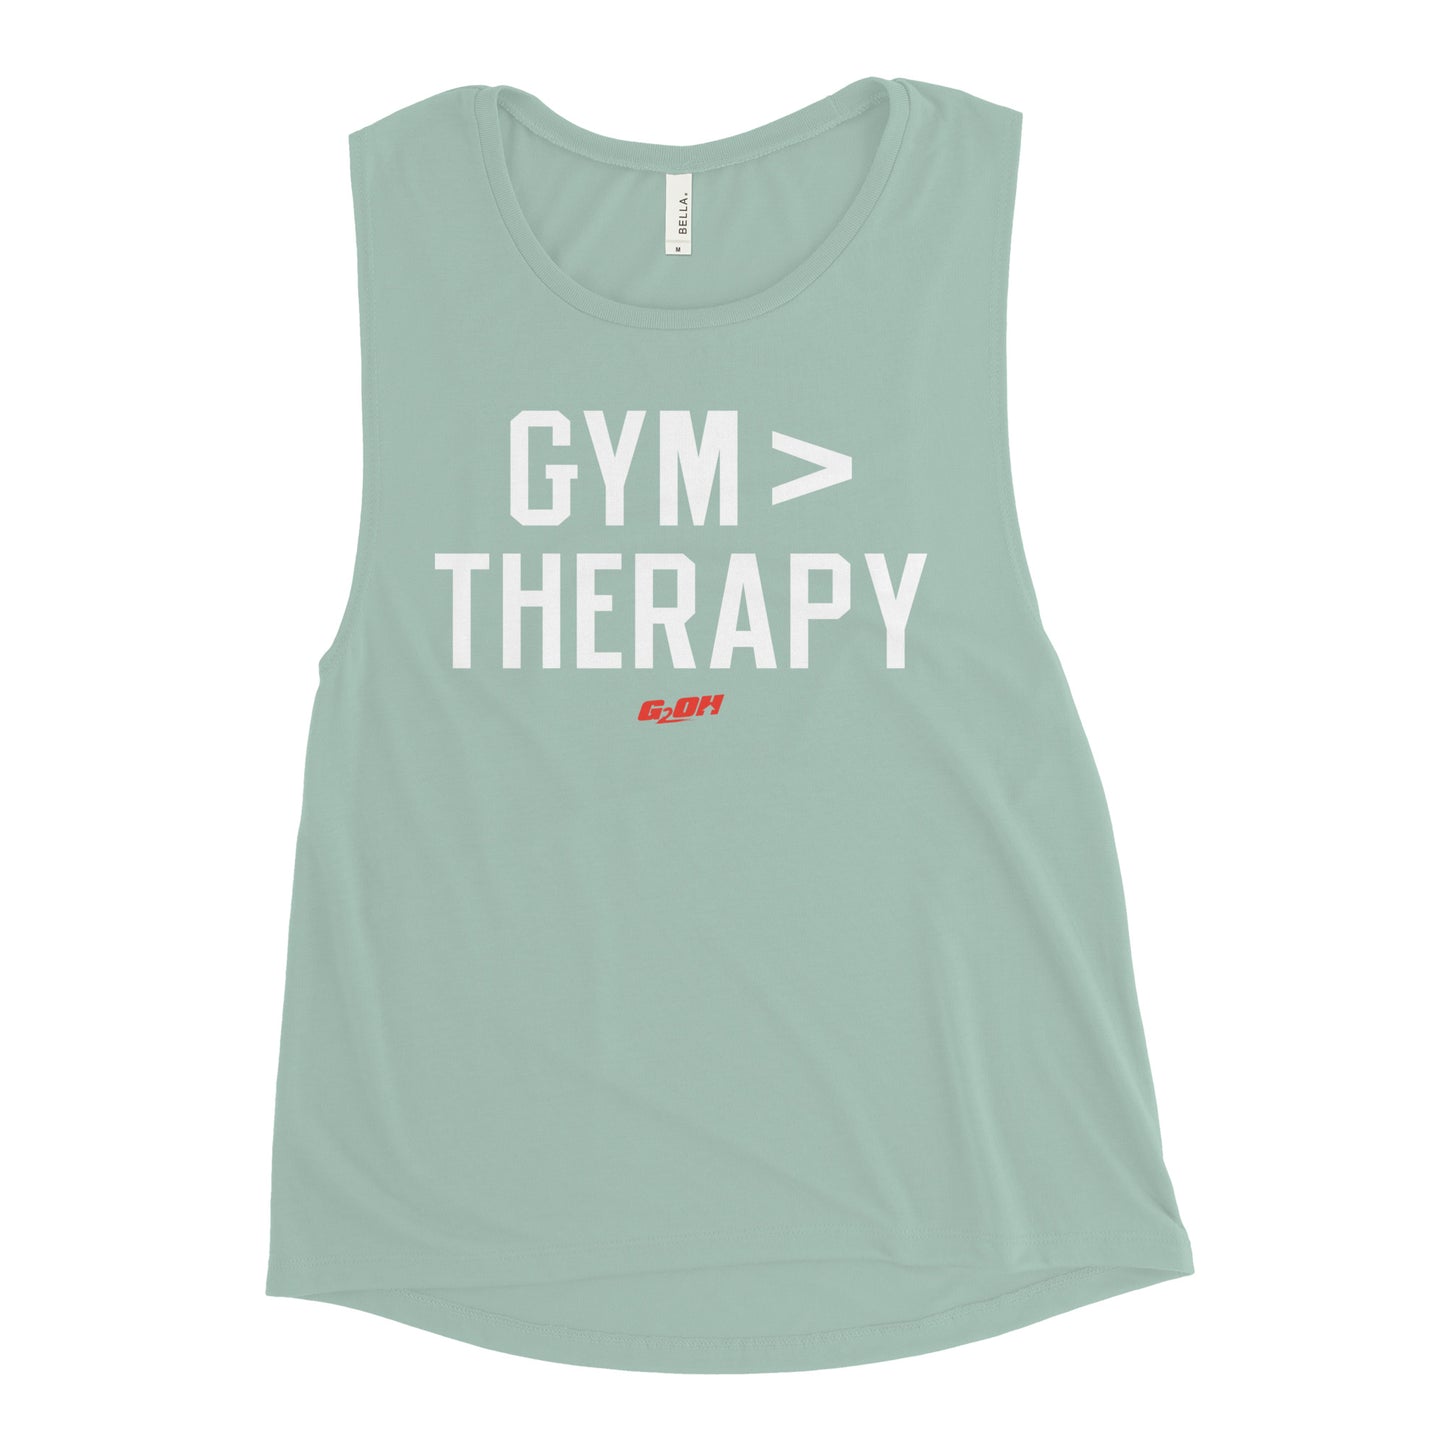 Gym > Therapy Women's Muscle Tank